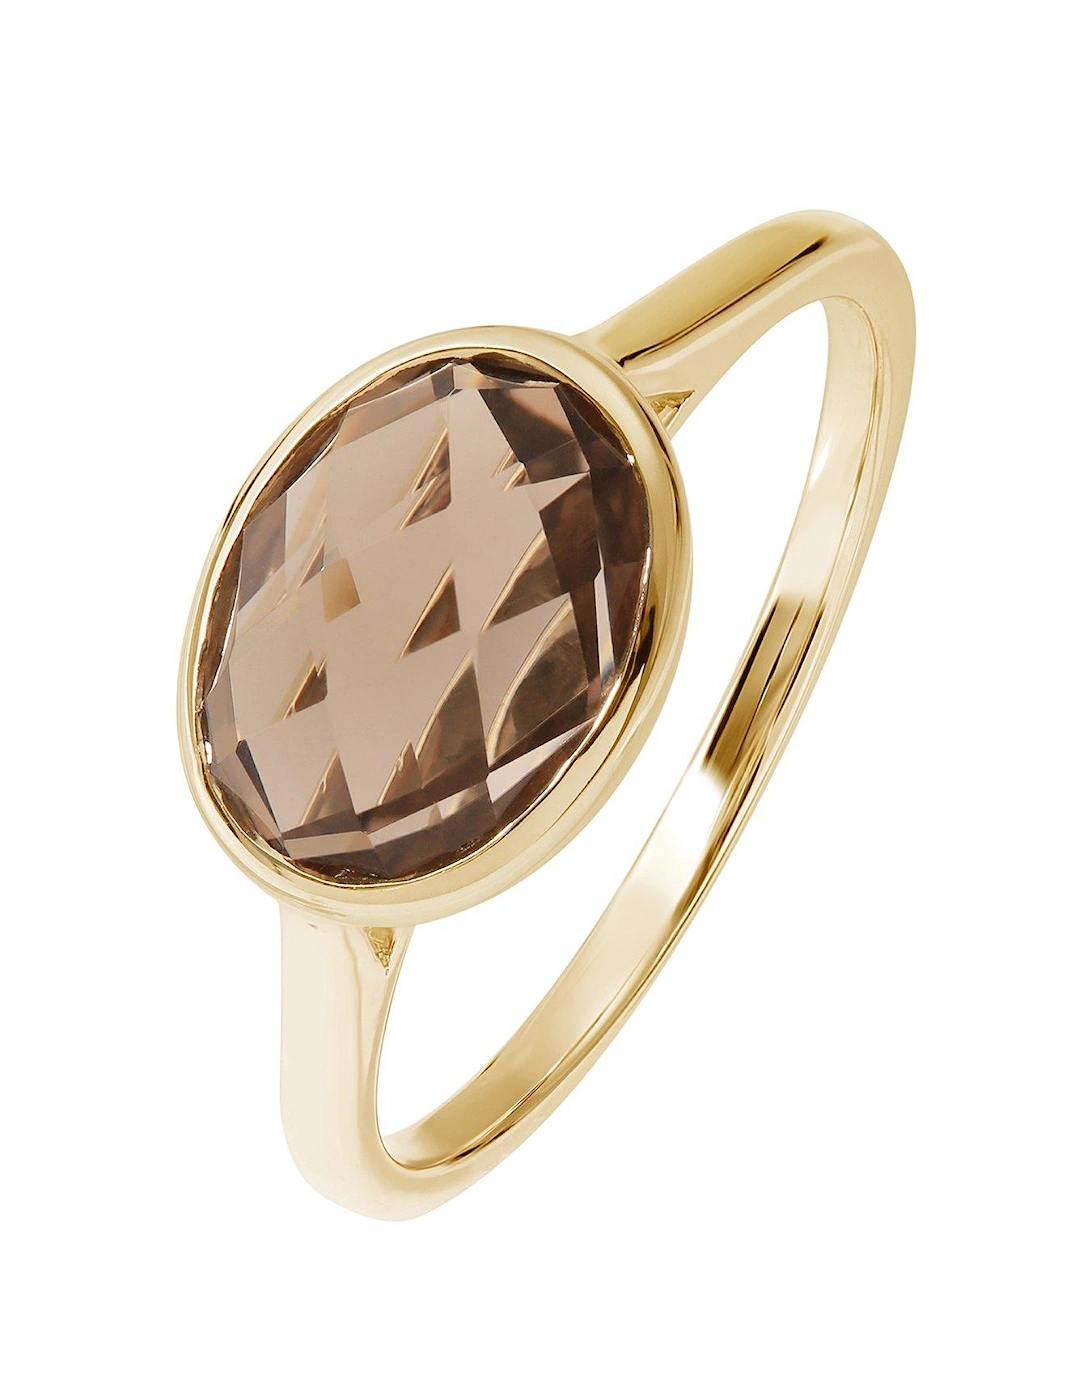 9ct Yellow Gold 9x7 Oval Briolette Cut Smoky Quartz Ring, 2 of 1